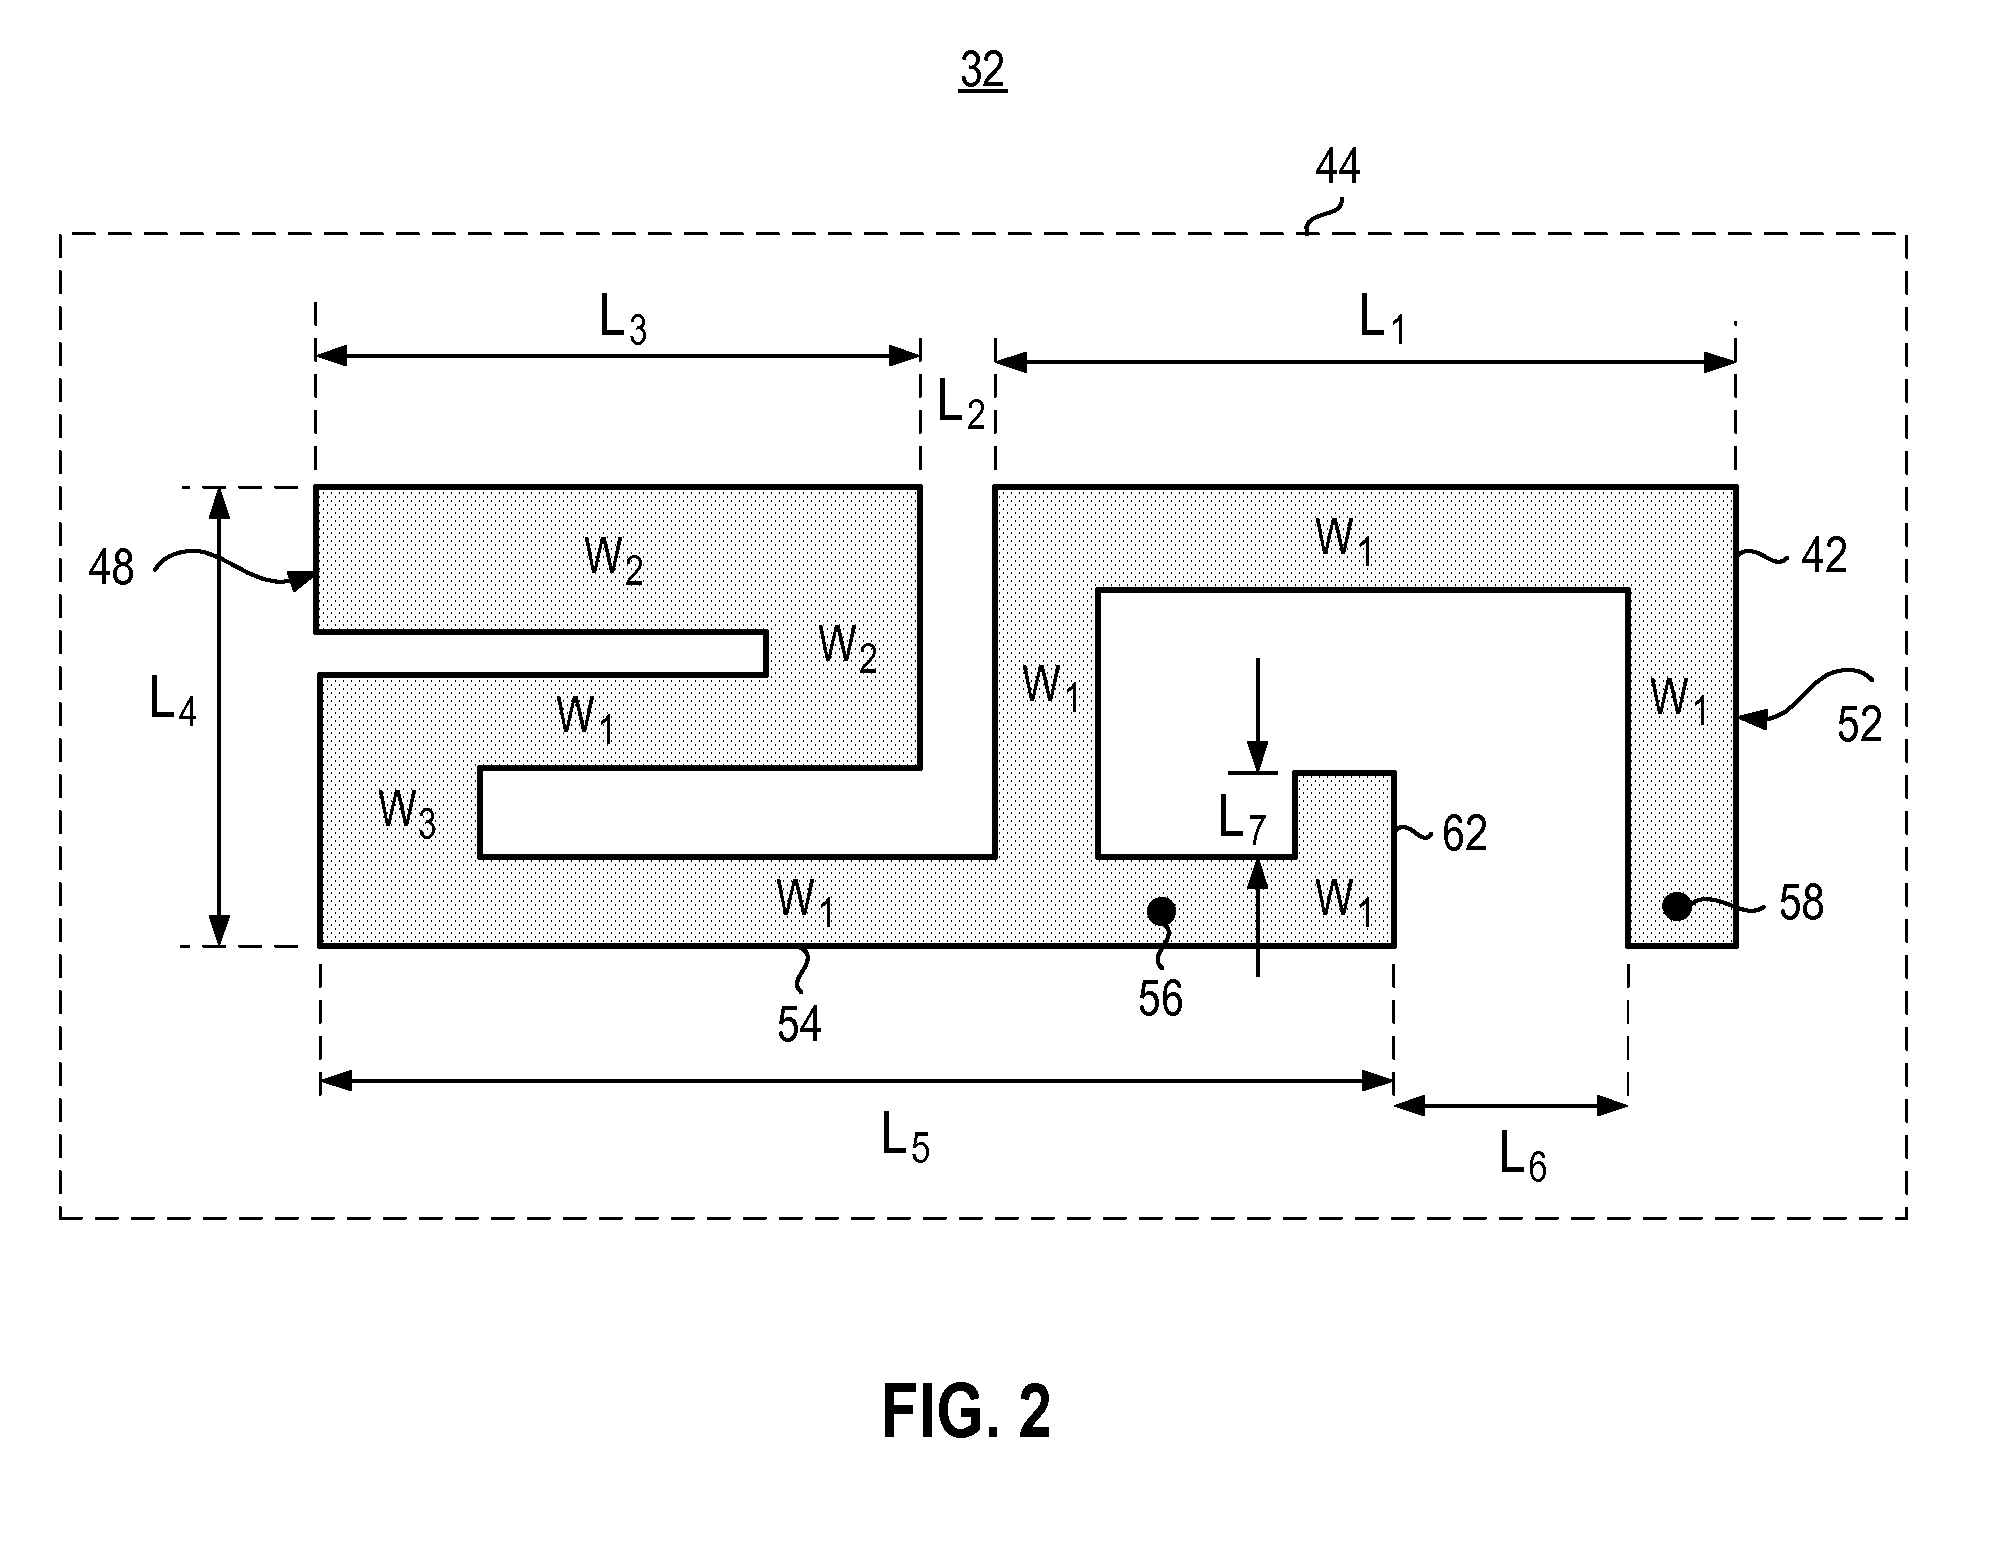 Slot-strip antenna apparatus for a radio device operable over multiple frequency bands